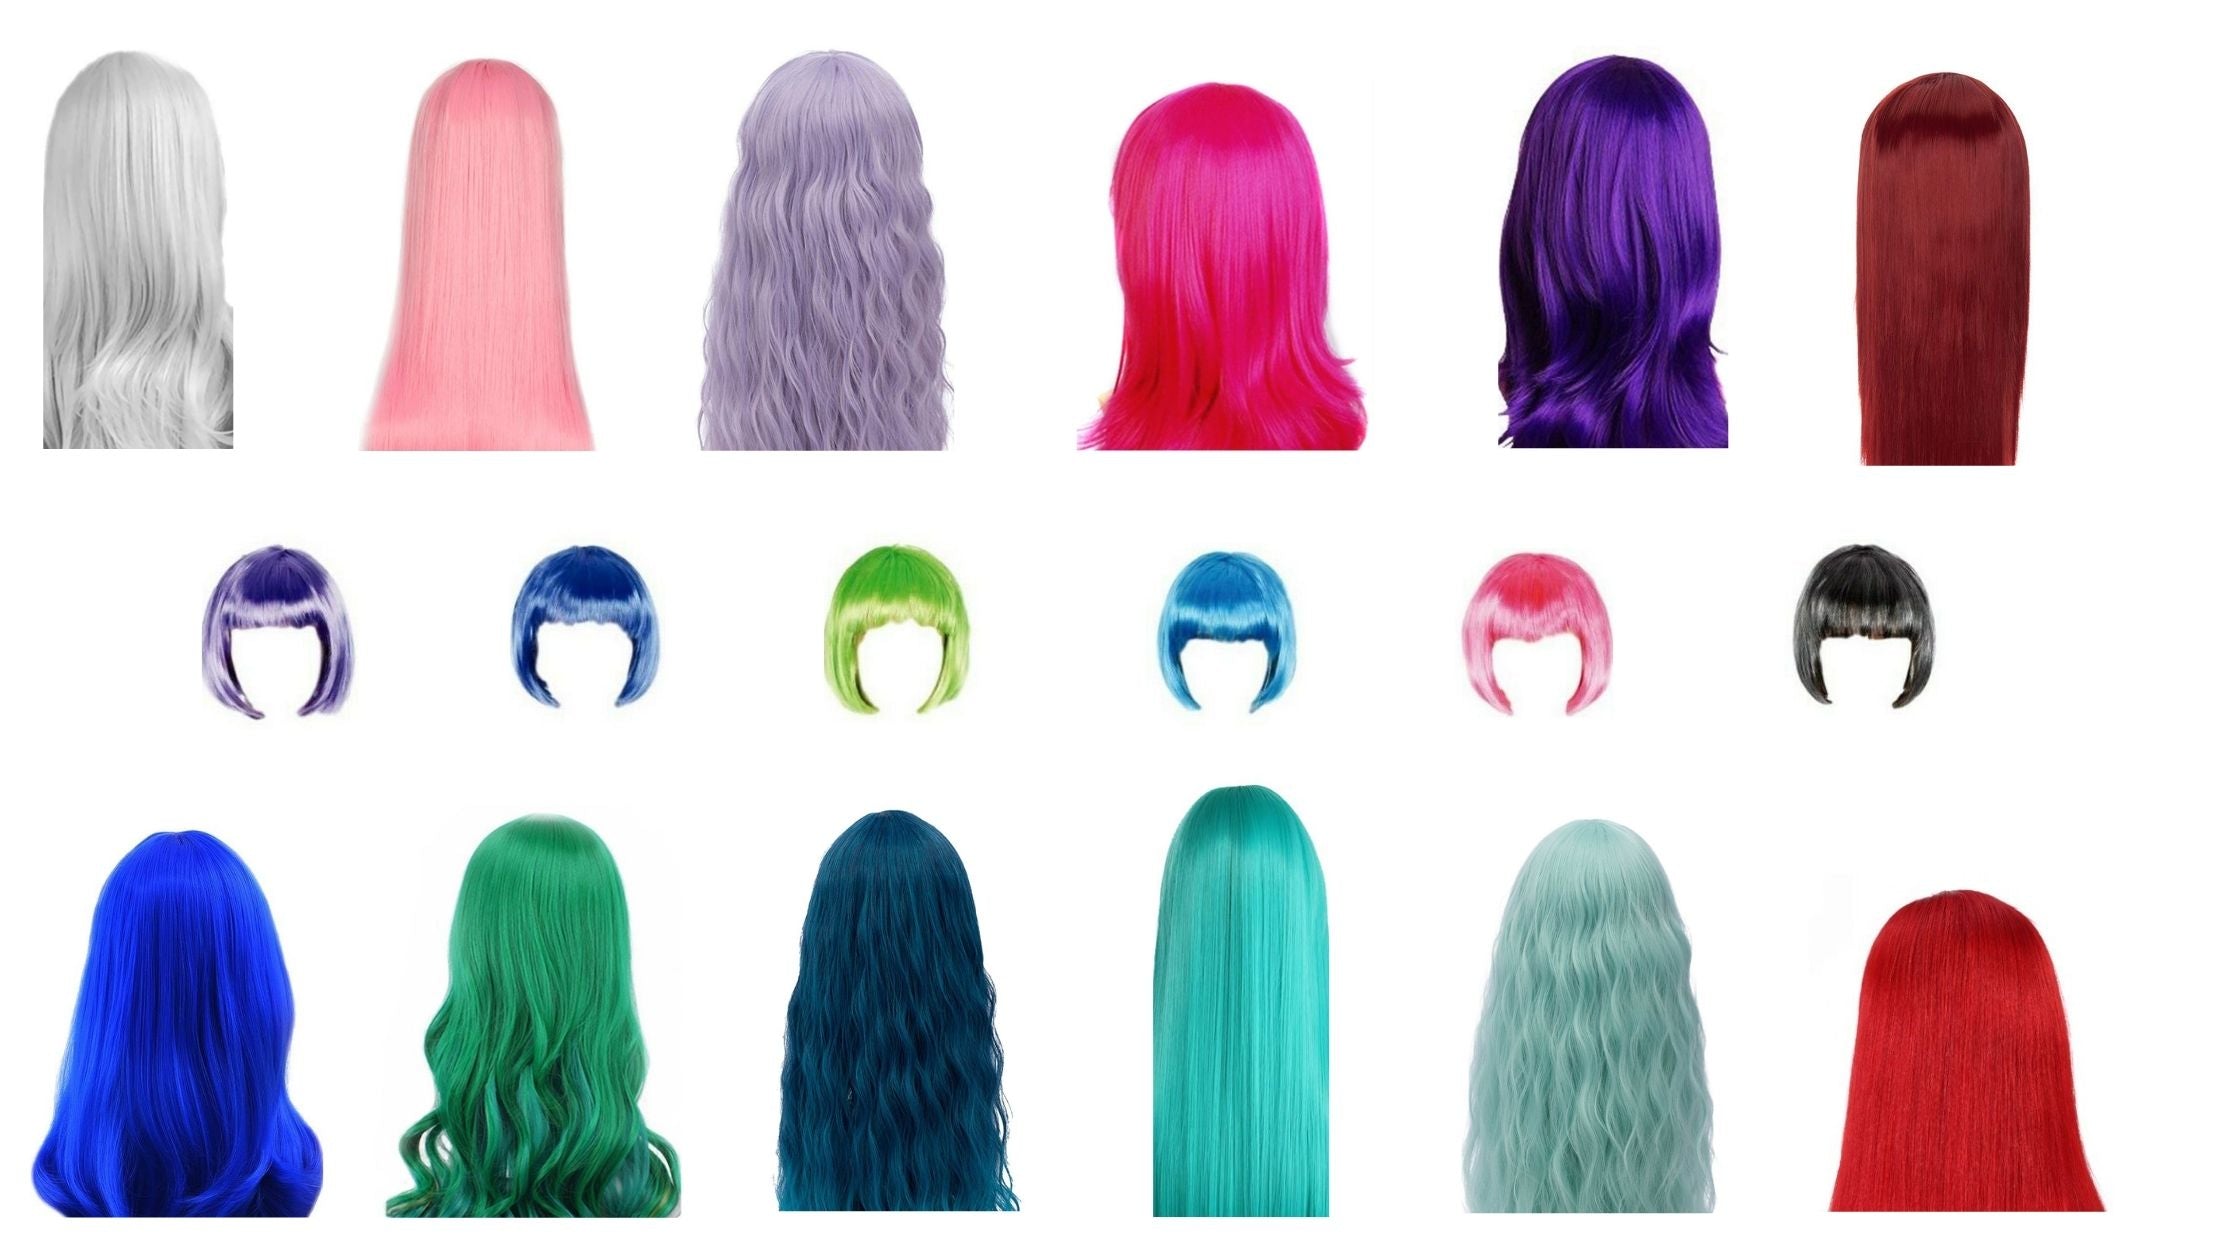 display of long short curly straight colorful and fun party wigs at wig ave austin tx